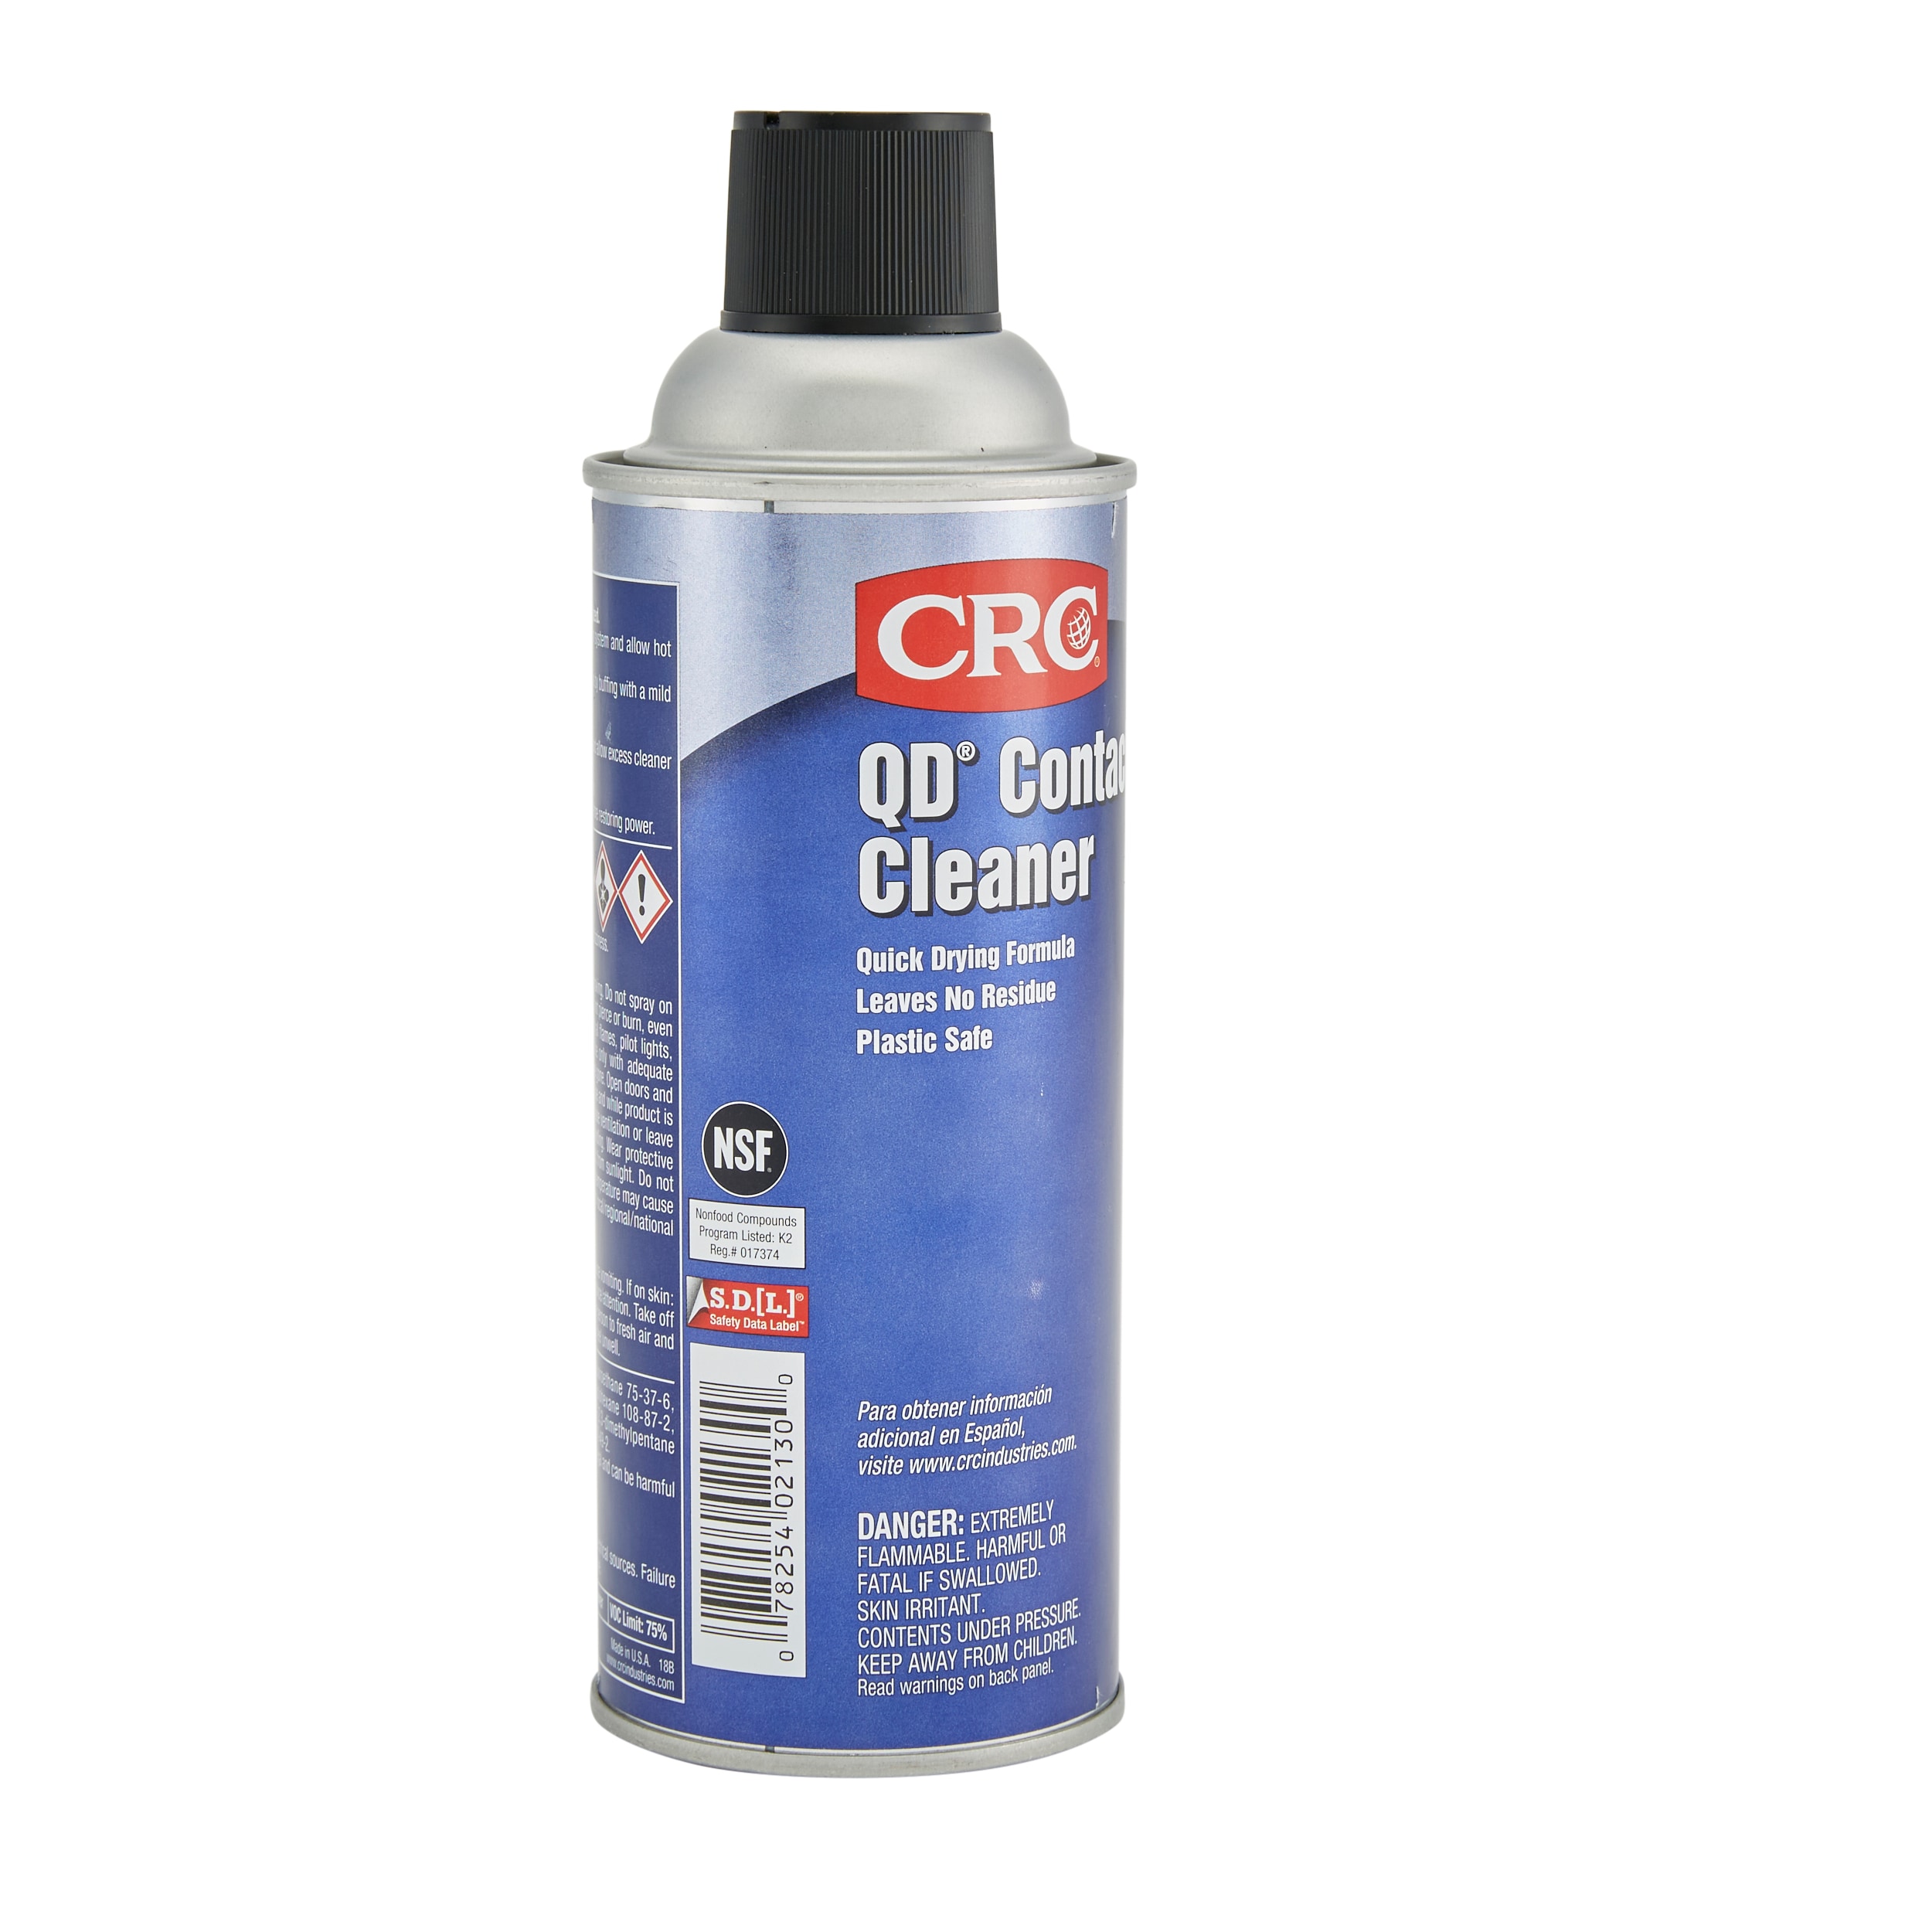 CONTACT CLEANER PLUS Crc, Cleaner, Clear, Electrical